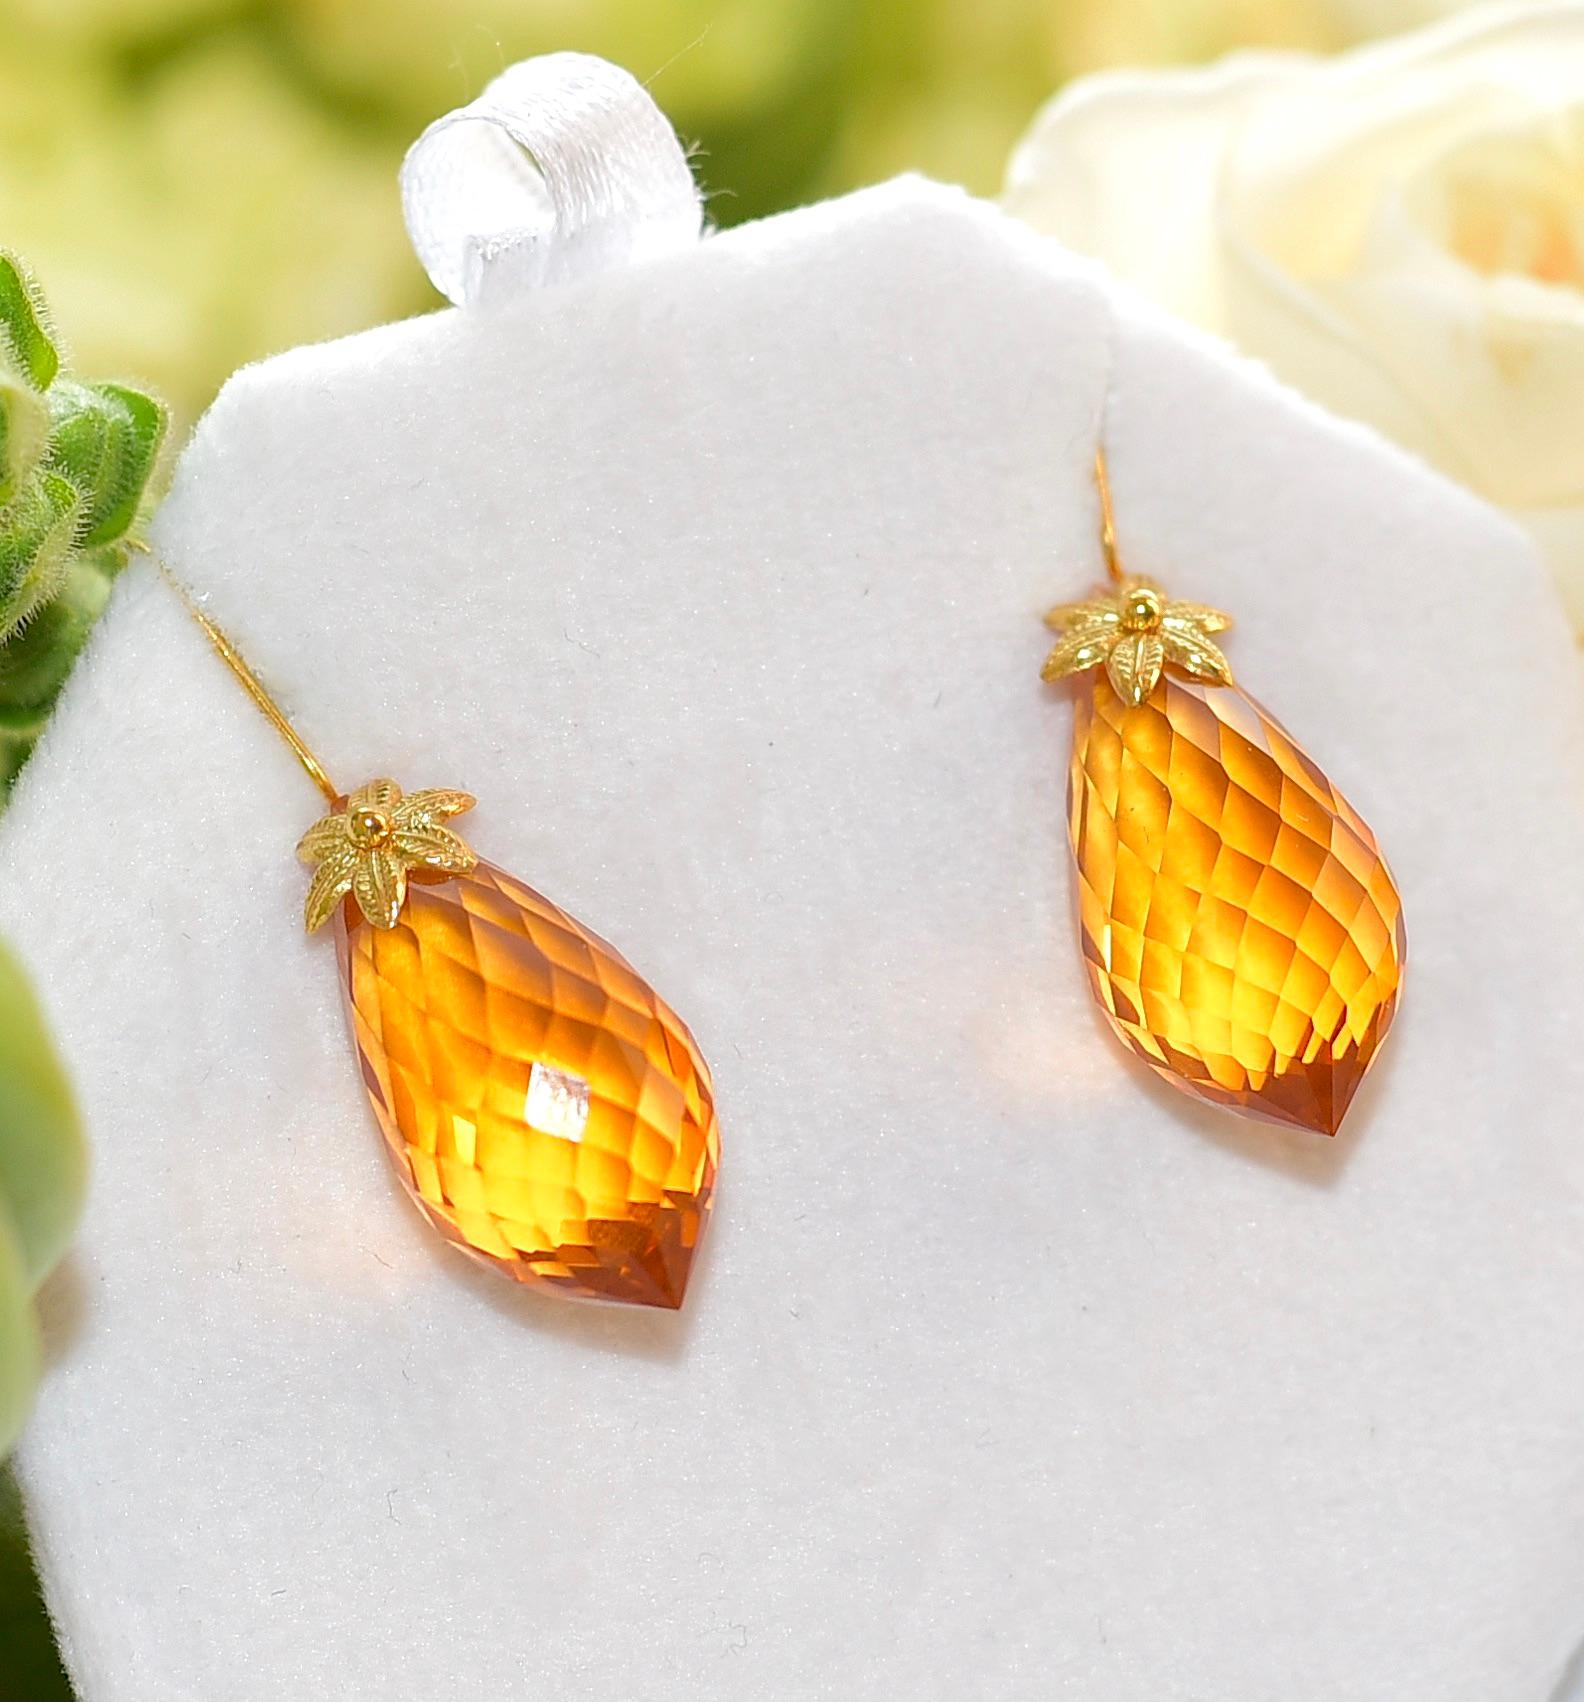 This unique pair of lab-created Brazilian Orange Citrine (21mm x 14mm) earrings is like a goddess! 18K Solid Yellow Gold delicate details give the earrings a feminine look. Simple sophistication for your everyday accessories! The perfect gift!